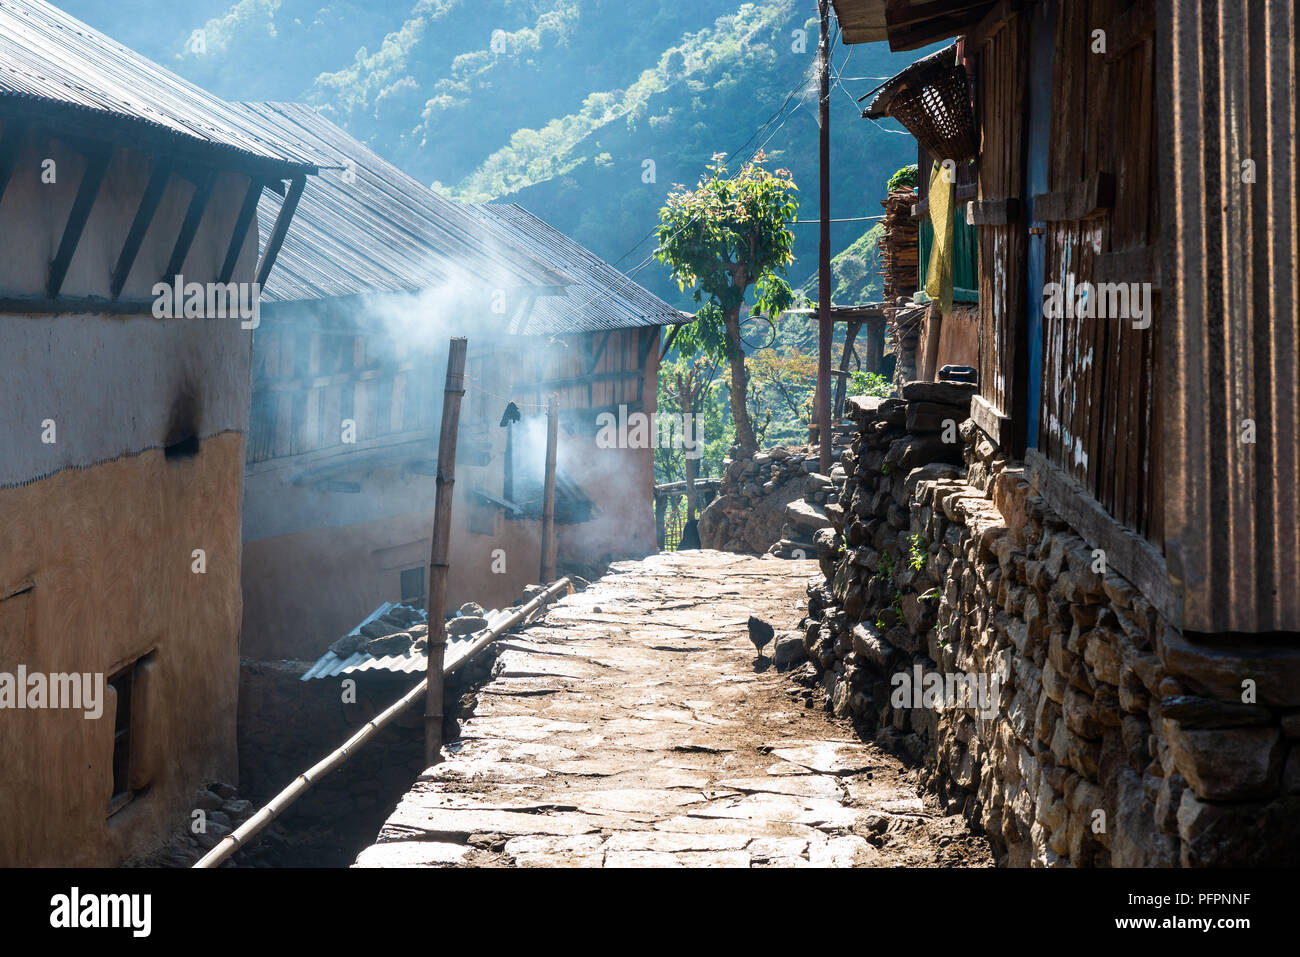 Small village in Lamjung district, Nepal Stock Photo